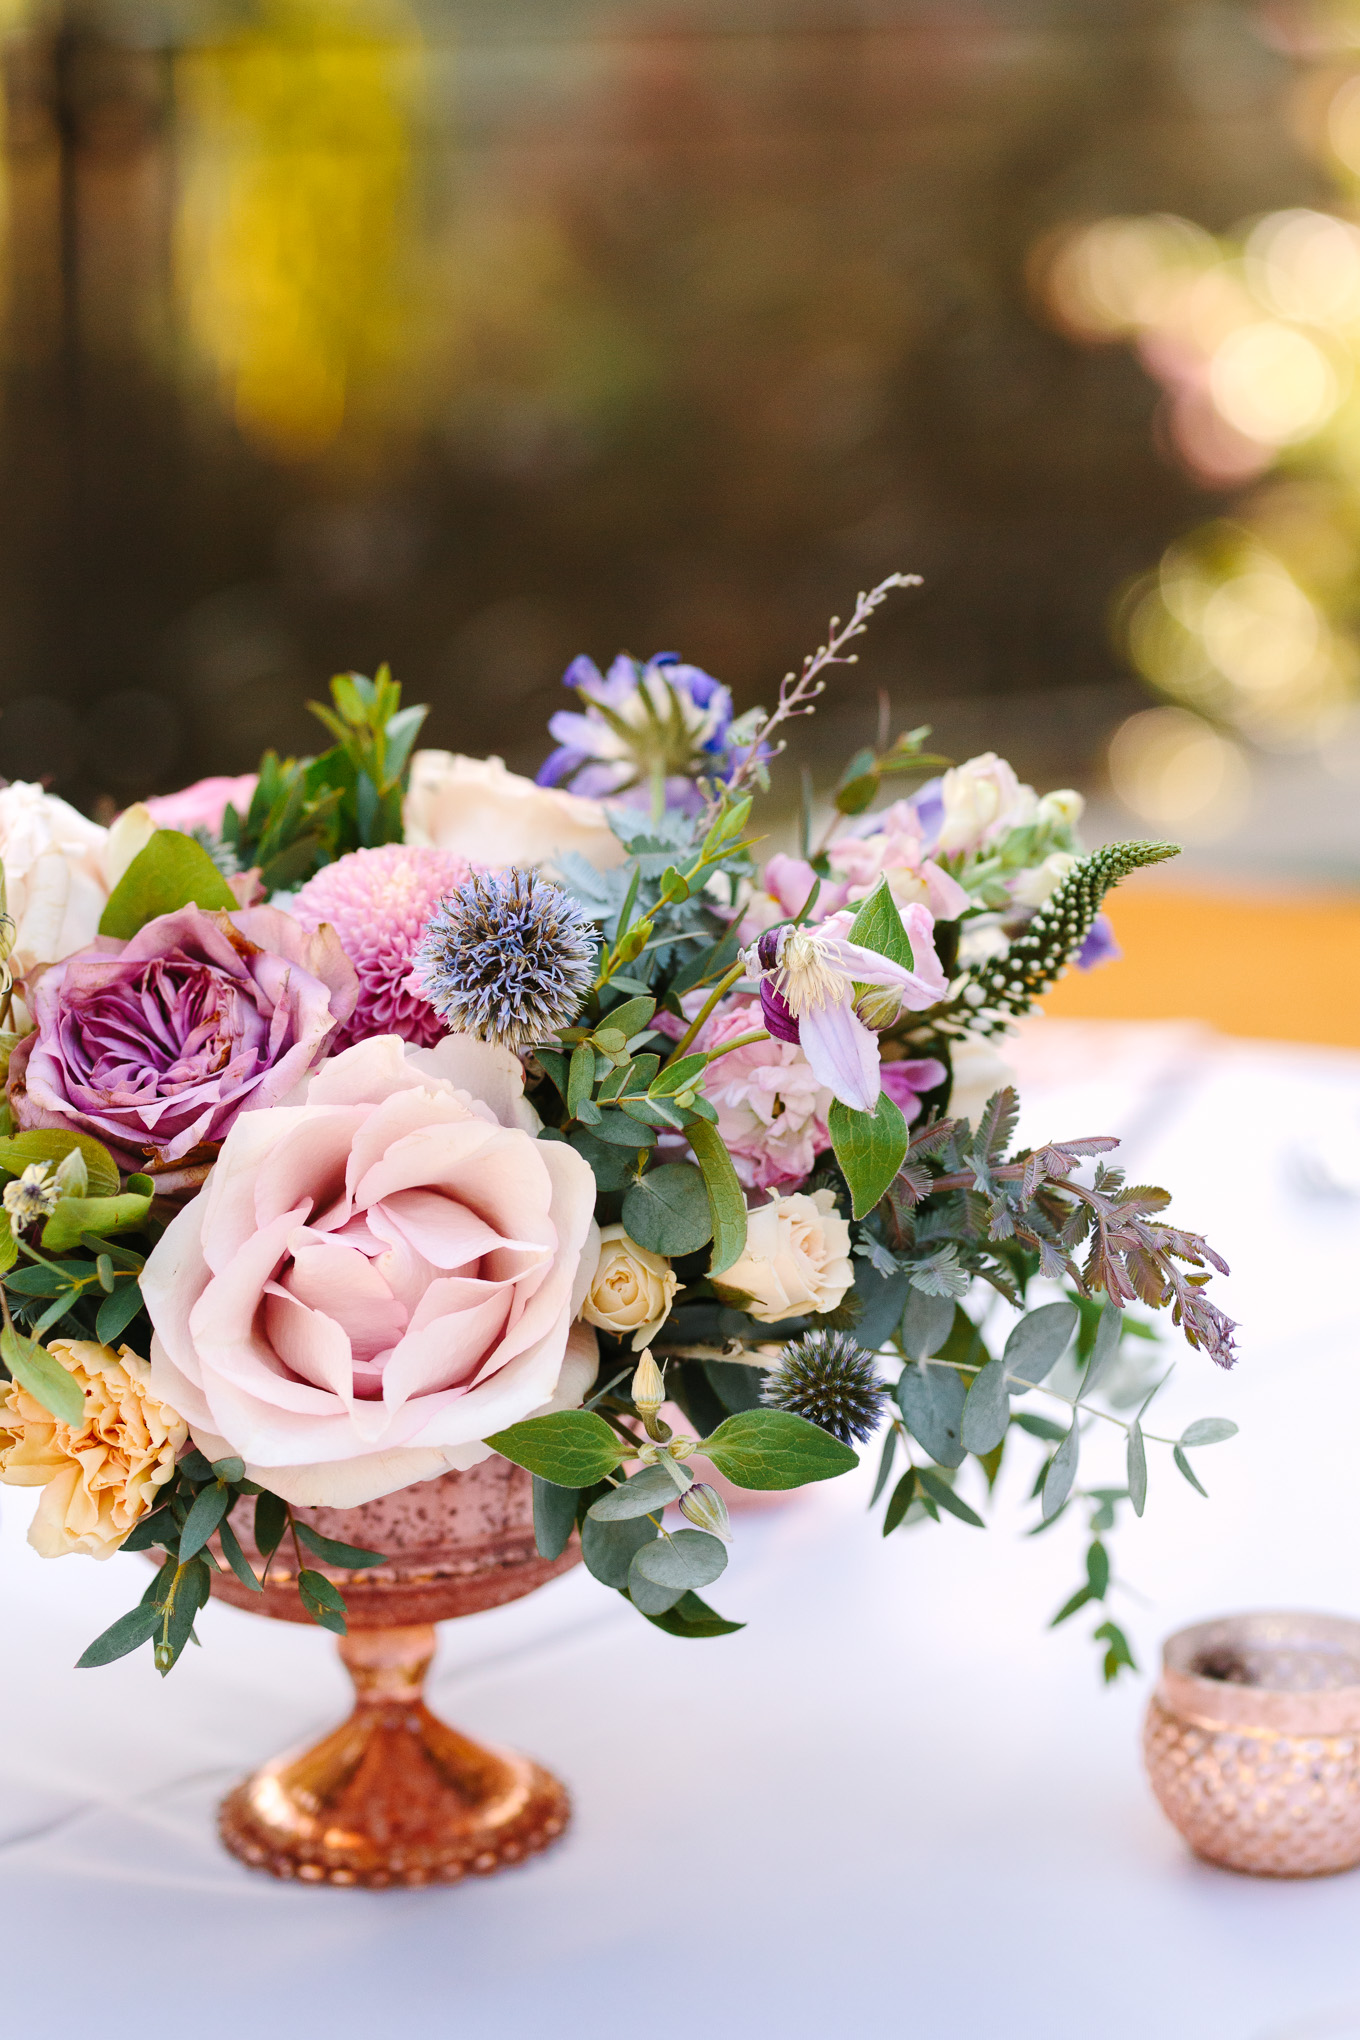 Purple and lavender floral centerpiece at Houdini Estate wedding | Best Southern California Garden Wedding Venues | Colorful and elevated wedding photography for fun-loving couples | #gardenvenue #weddingvenue #socalweddingvenue #bouquetideas #uniquebouquet   Source: Mary Costa Photography | Los Angeles 